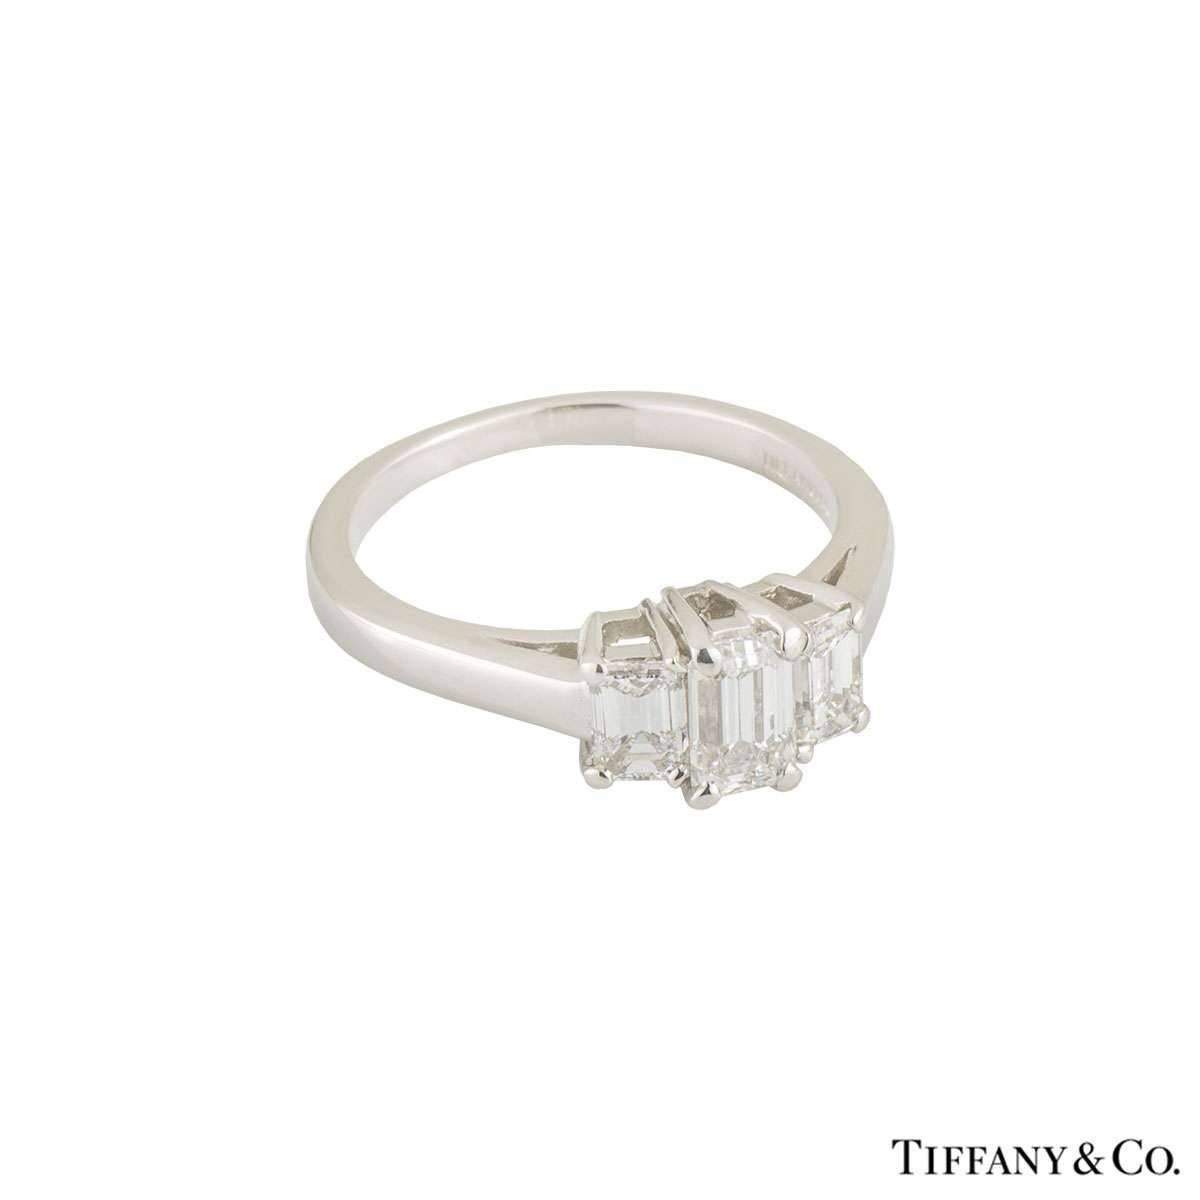 A stunning platinum Tiffany & Co. diamond trilogy ring. The ring comprises of an emerald cut diamond in a 4 claw setting with an approximate weight of 0.46ct, G colour and VS clarity. Complementing the central stone are 2 emerald cut diamonds